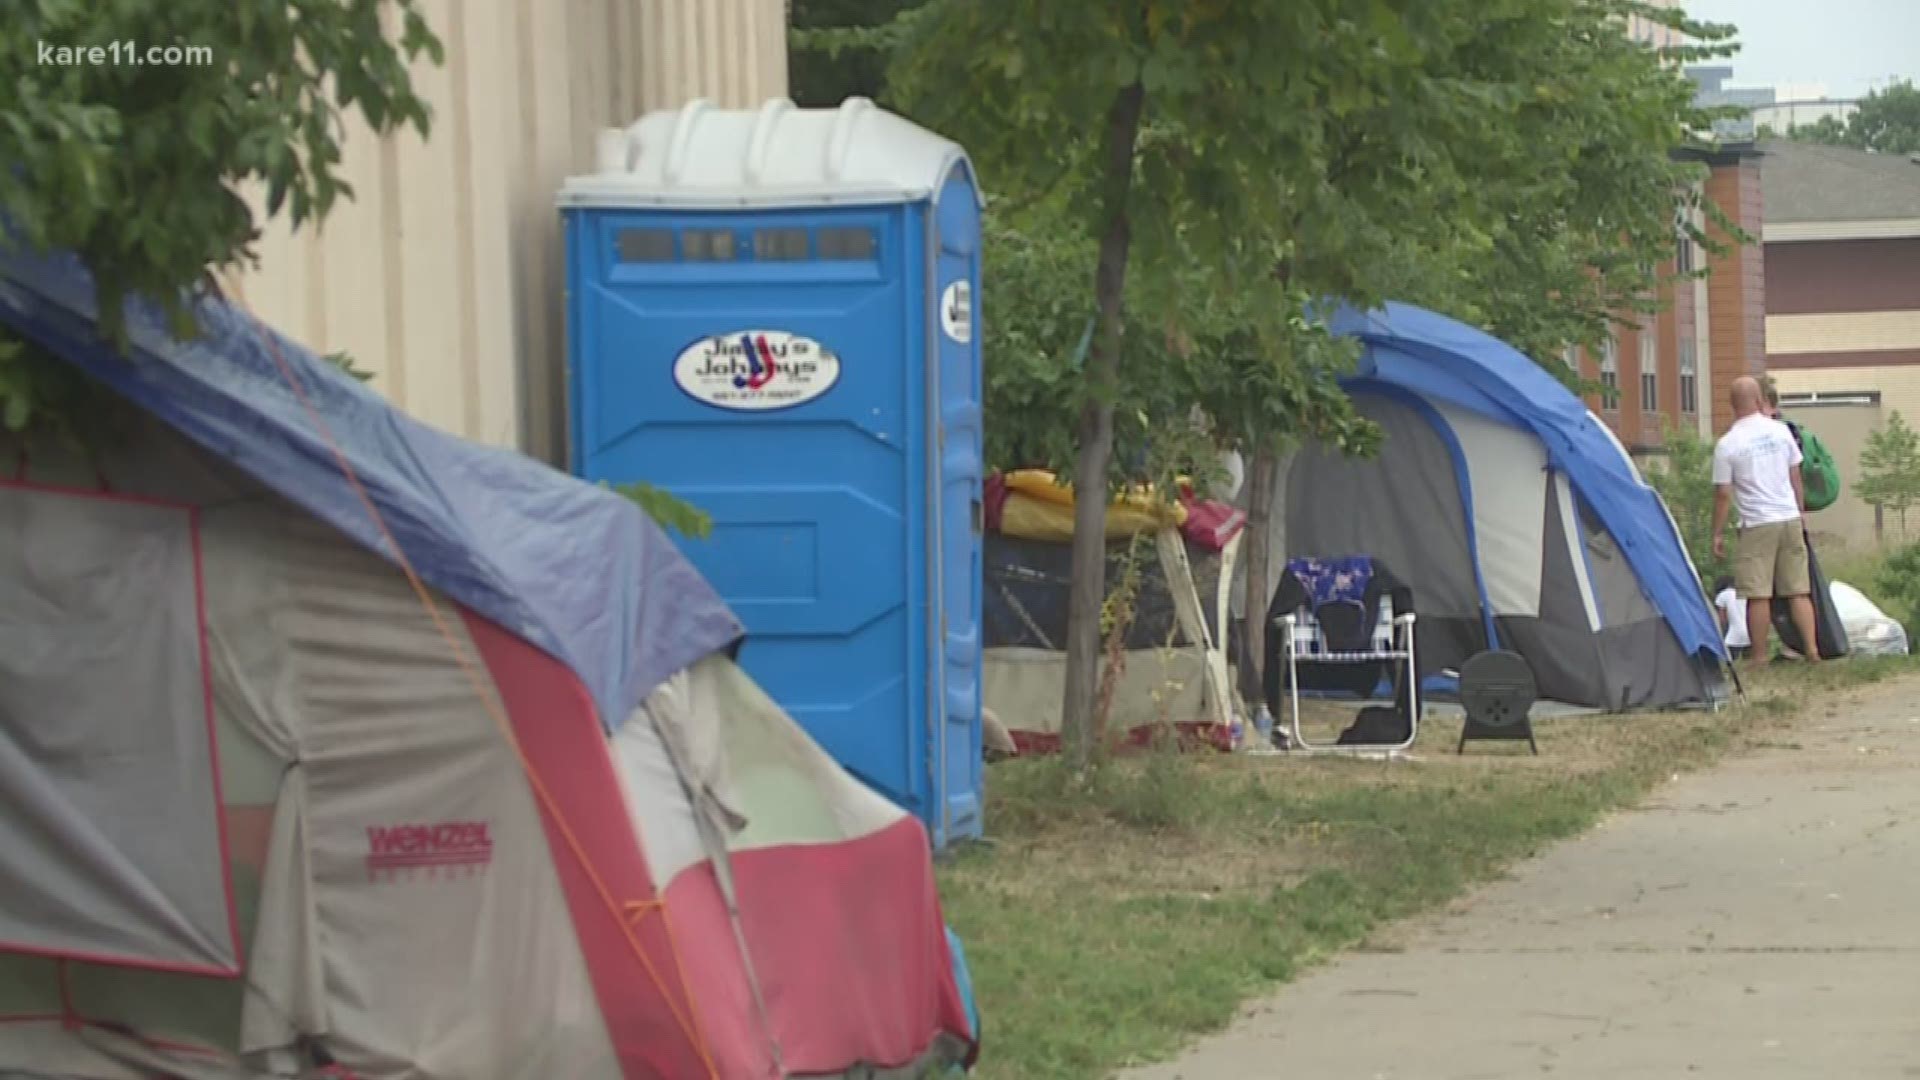 A large camp of homeless people has been growing this summer -- and community leaders are now concerned about their health and safety.